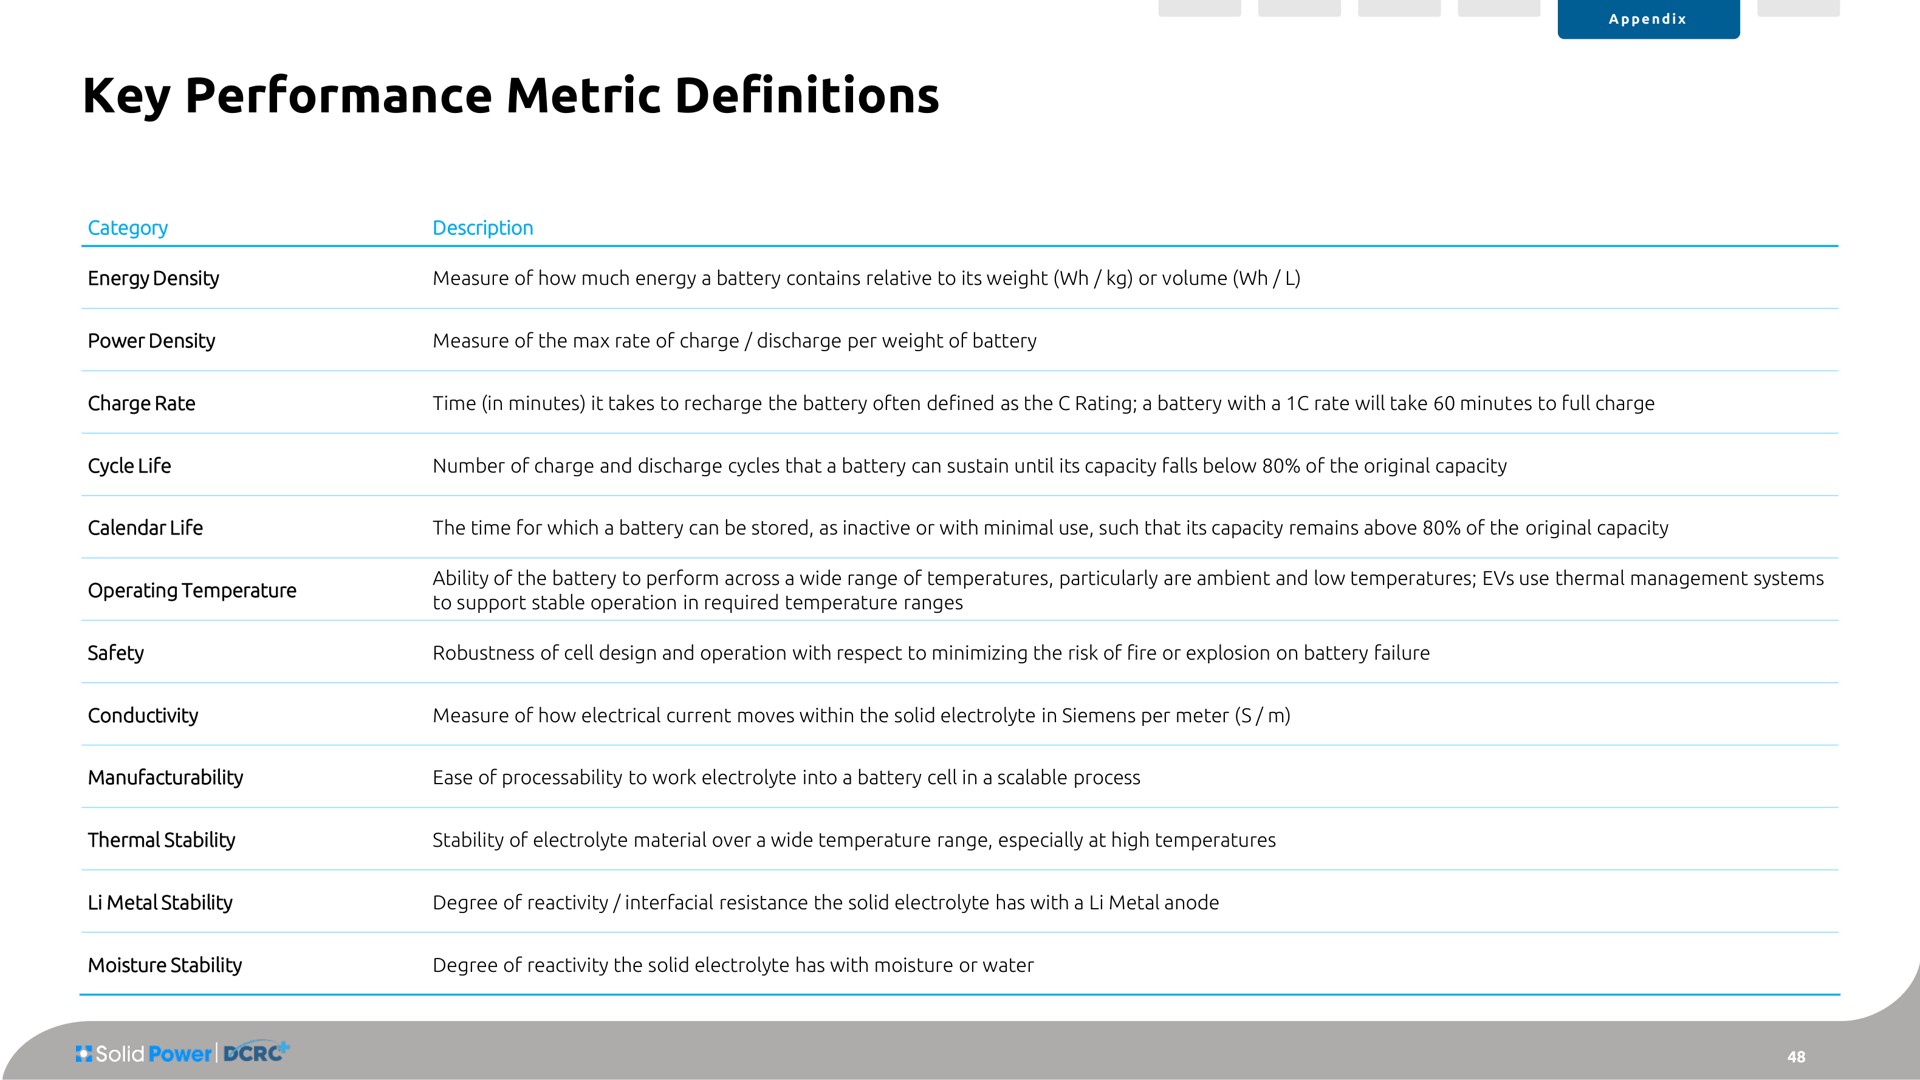 key performance metric definitions | Solid Power